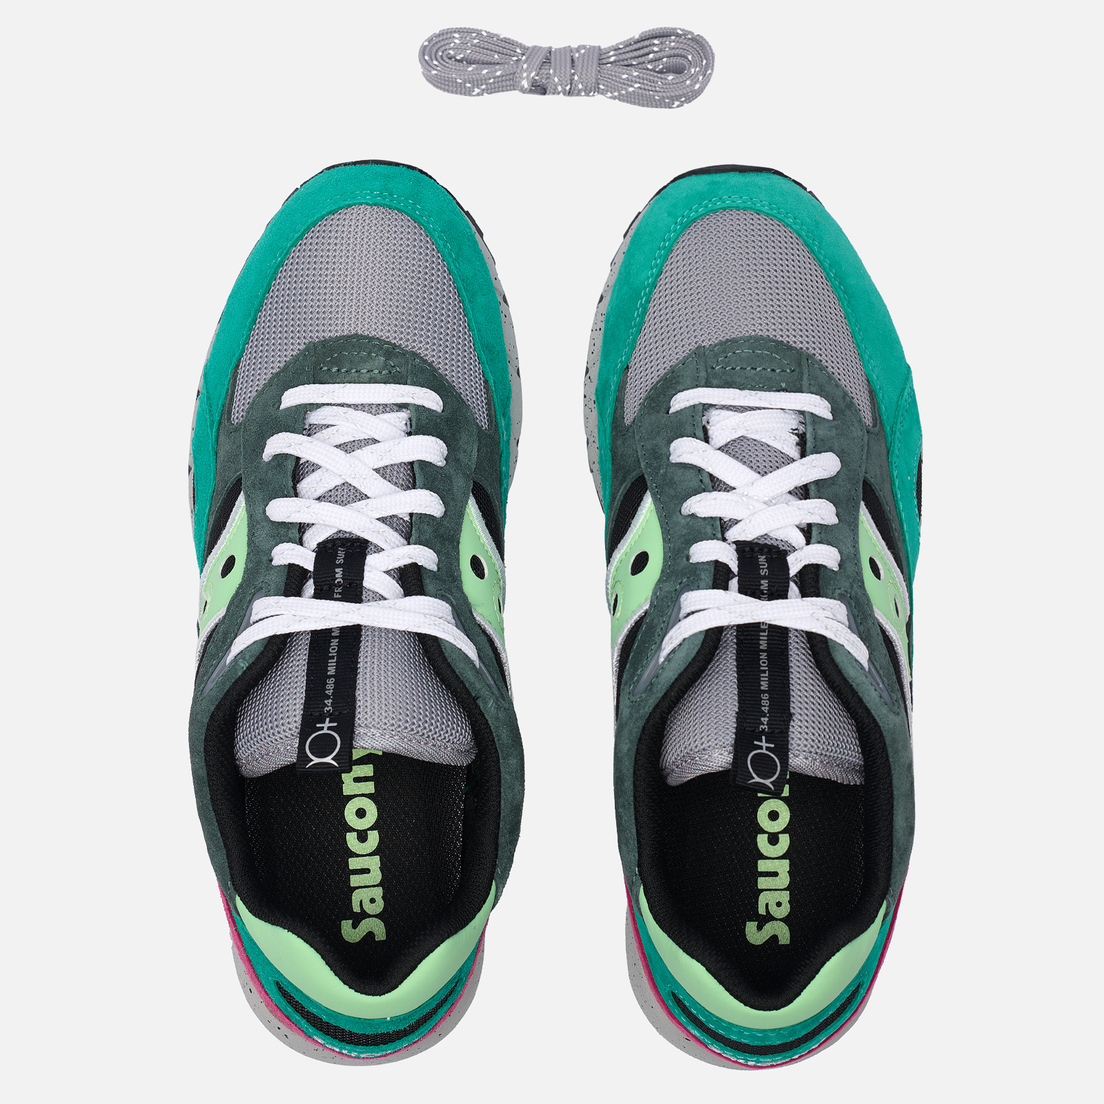 Saucony Кроссовки Shadow 6000 Planet Pack